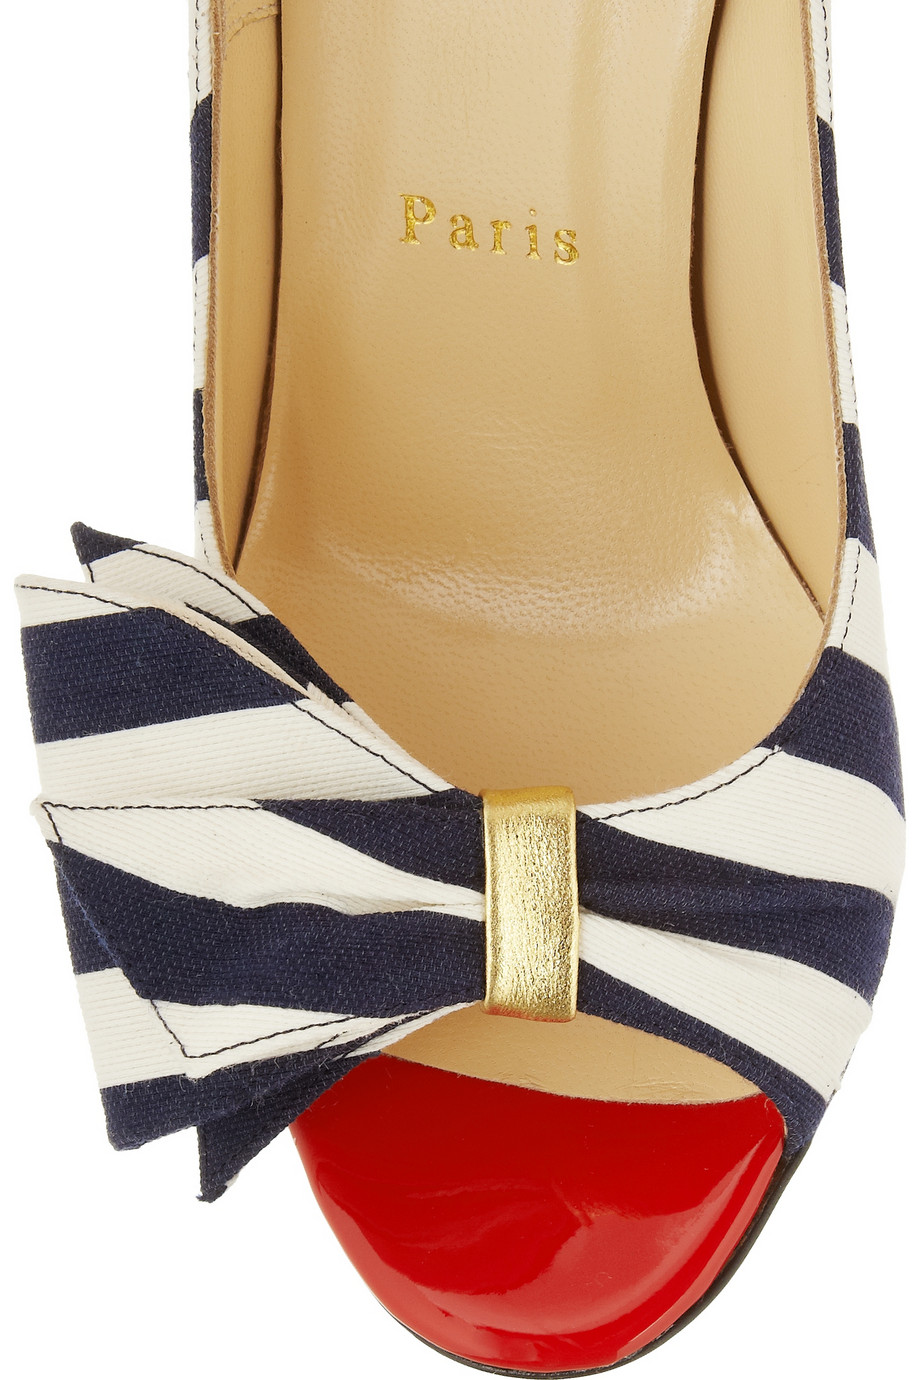 Christian Louboutin Just Soon 85 Striped Canvas Pumps in Blue - Lyst